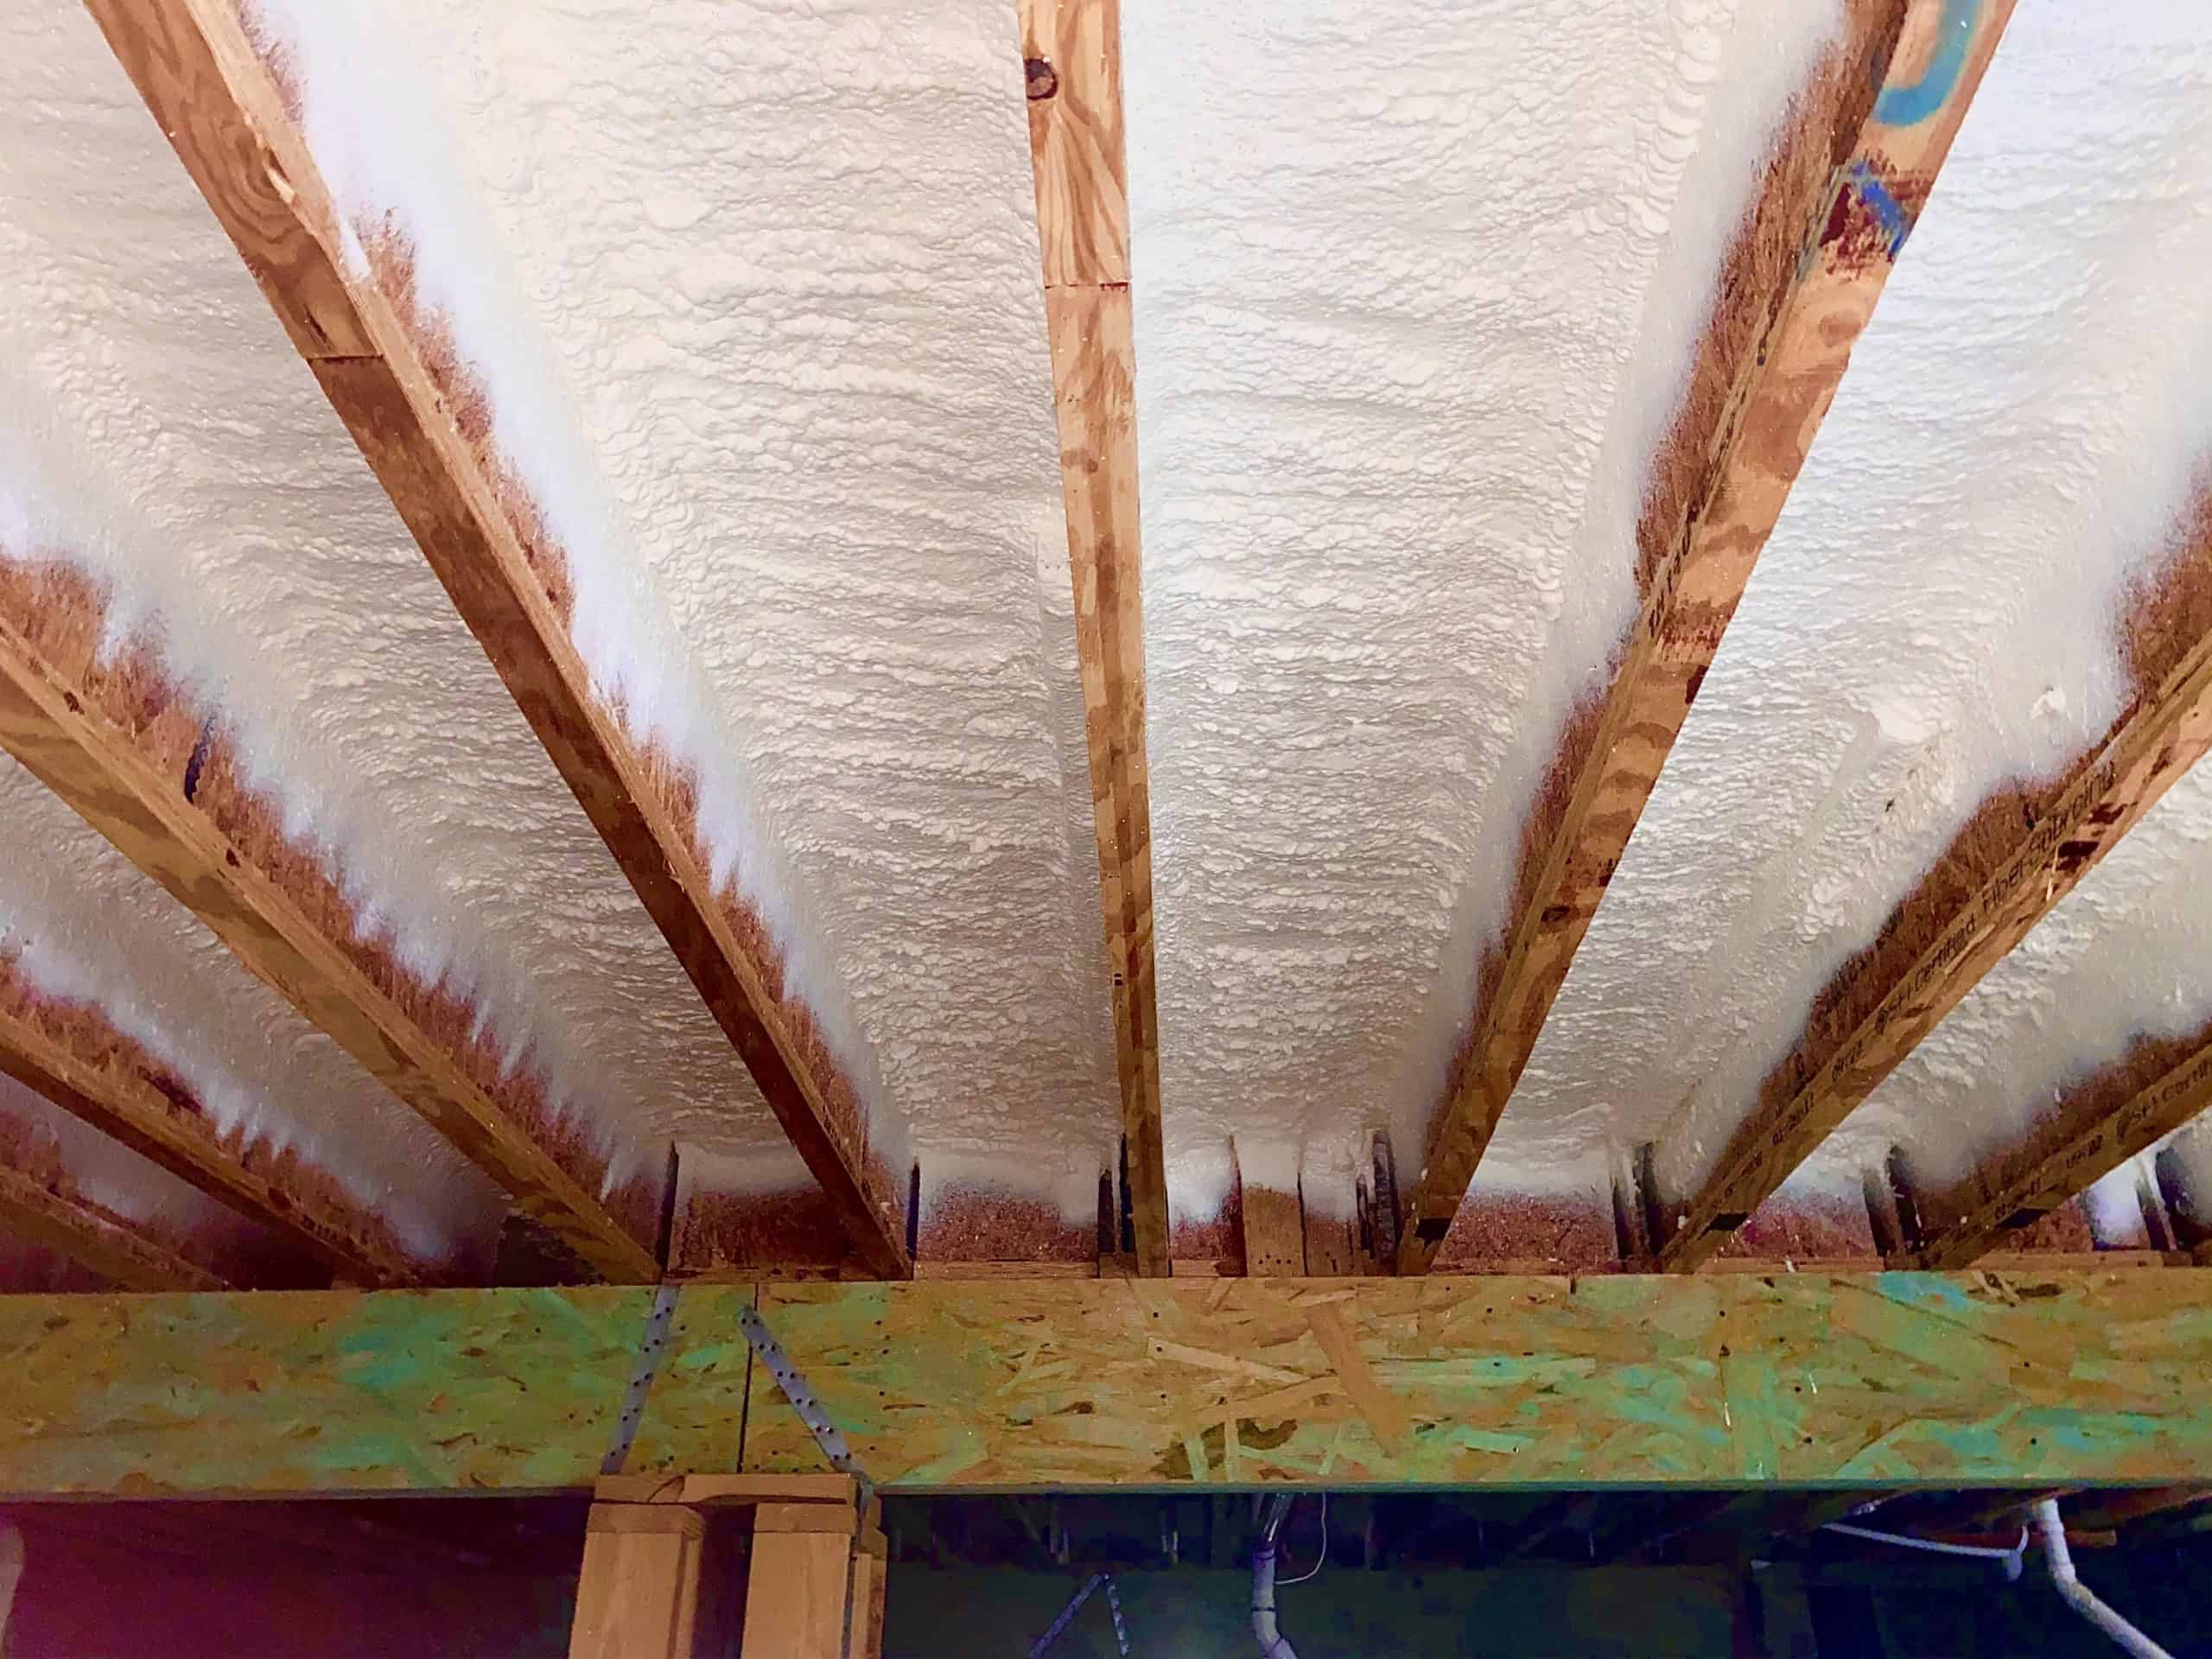 Installed spray foam board insulation under sagging floors to prevent wood rot